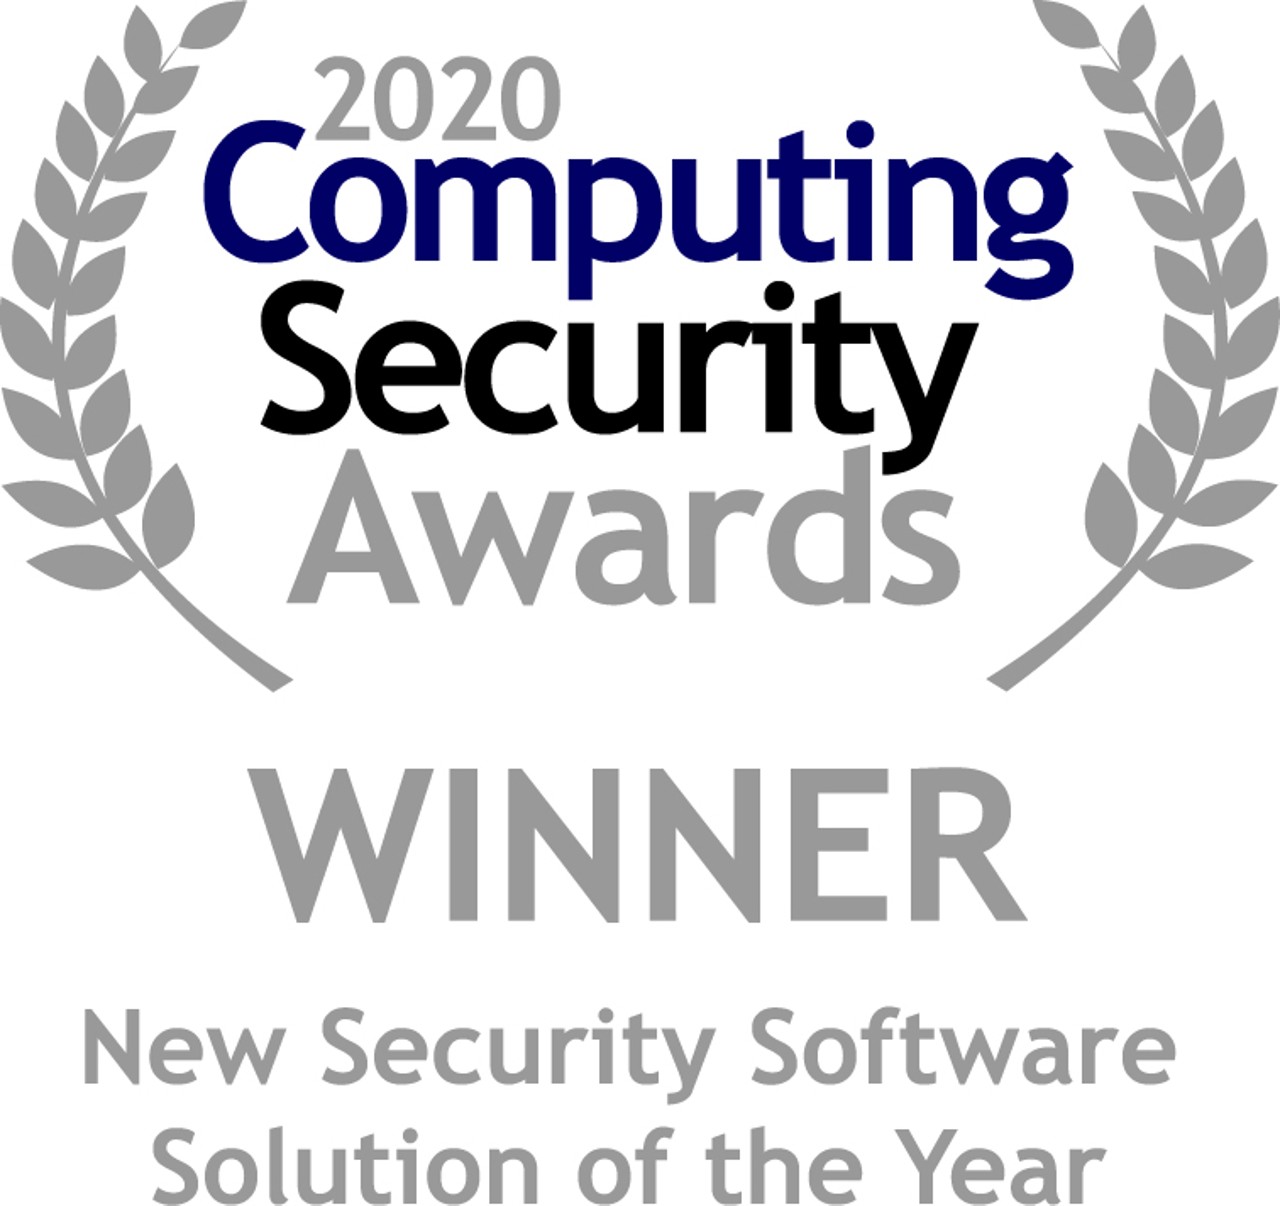 „New Security Software Solution of the Year”